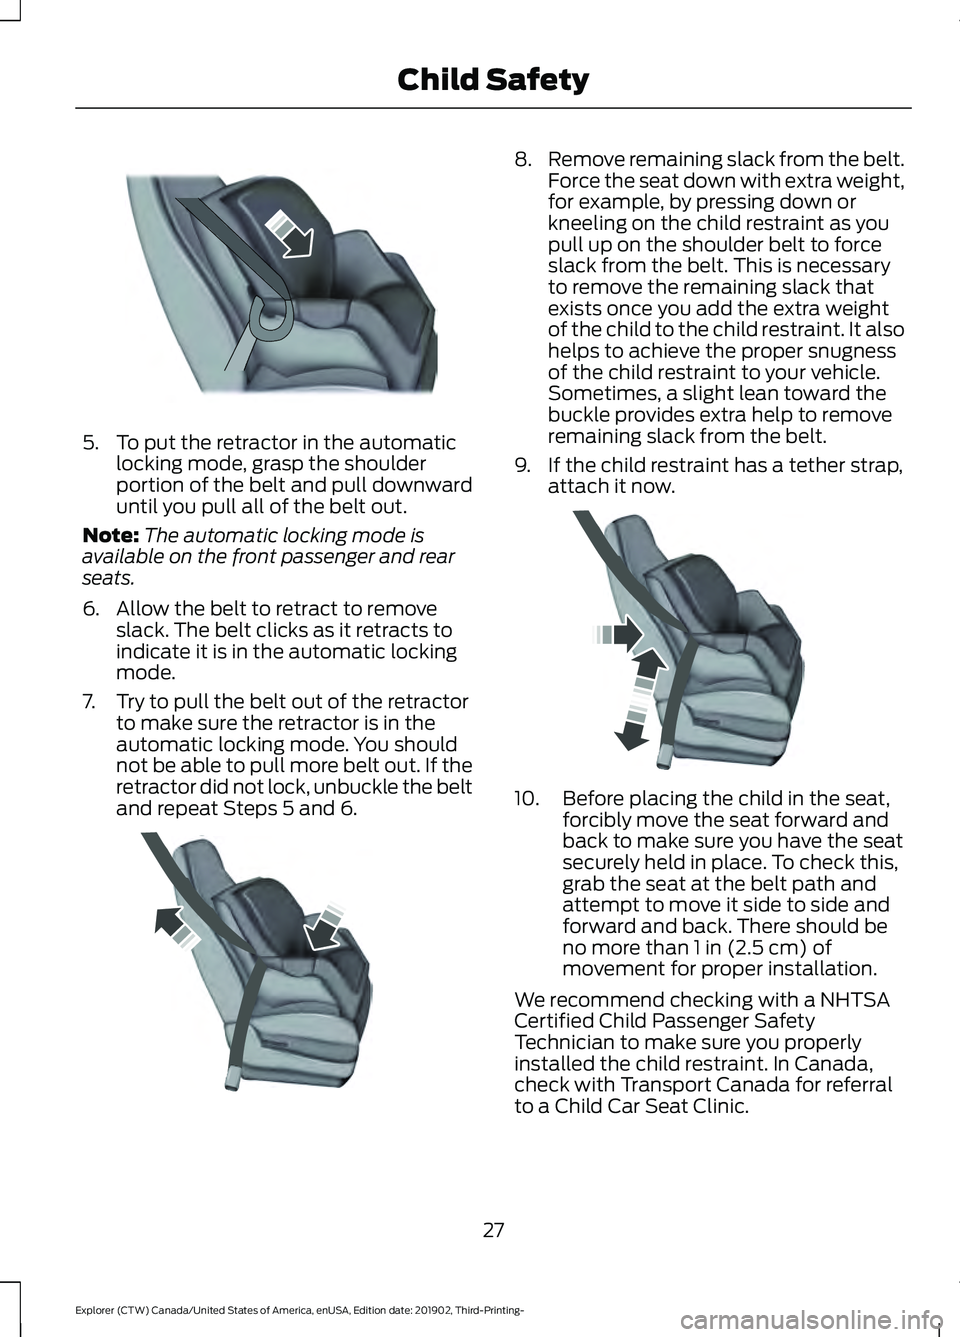 FORD EXPLORER 2020  Owners Manual 5. To put the retractor in the automatic
locking mode, grasp the shoulder
portion of the belt and pull downward
until you pull all of the belt out.
Note: The automatic locking mode is
available on the